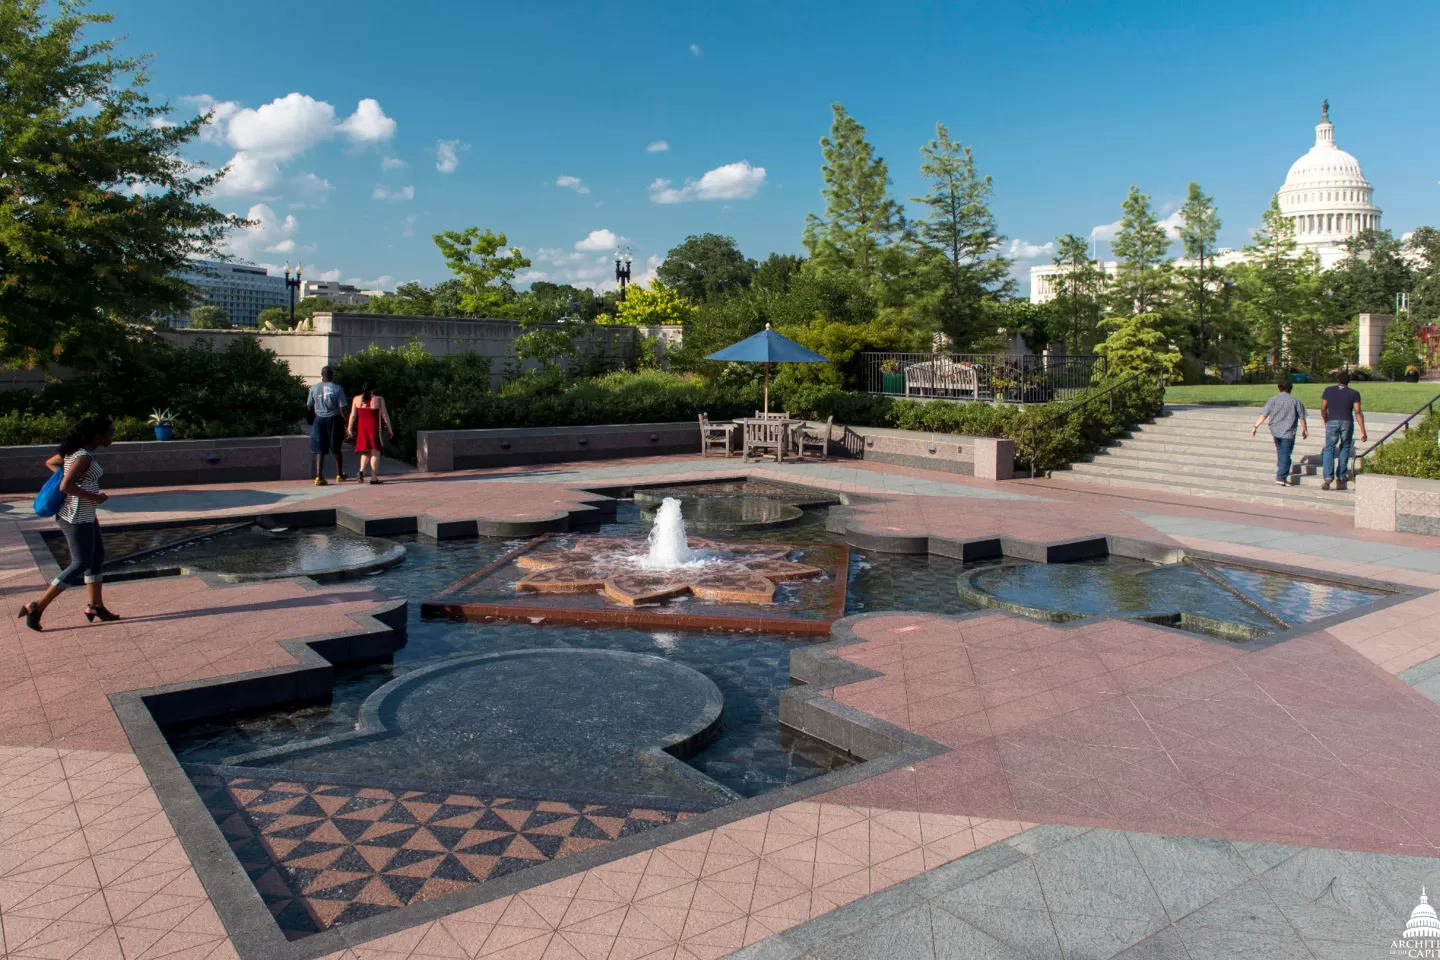 The First Ladies Water Garden honors the contributions of our nation's First Ladies.